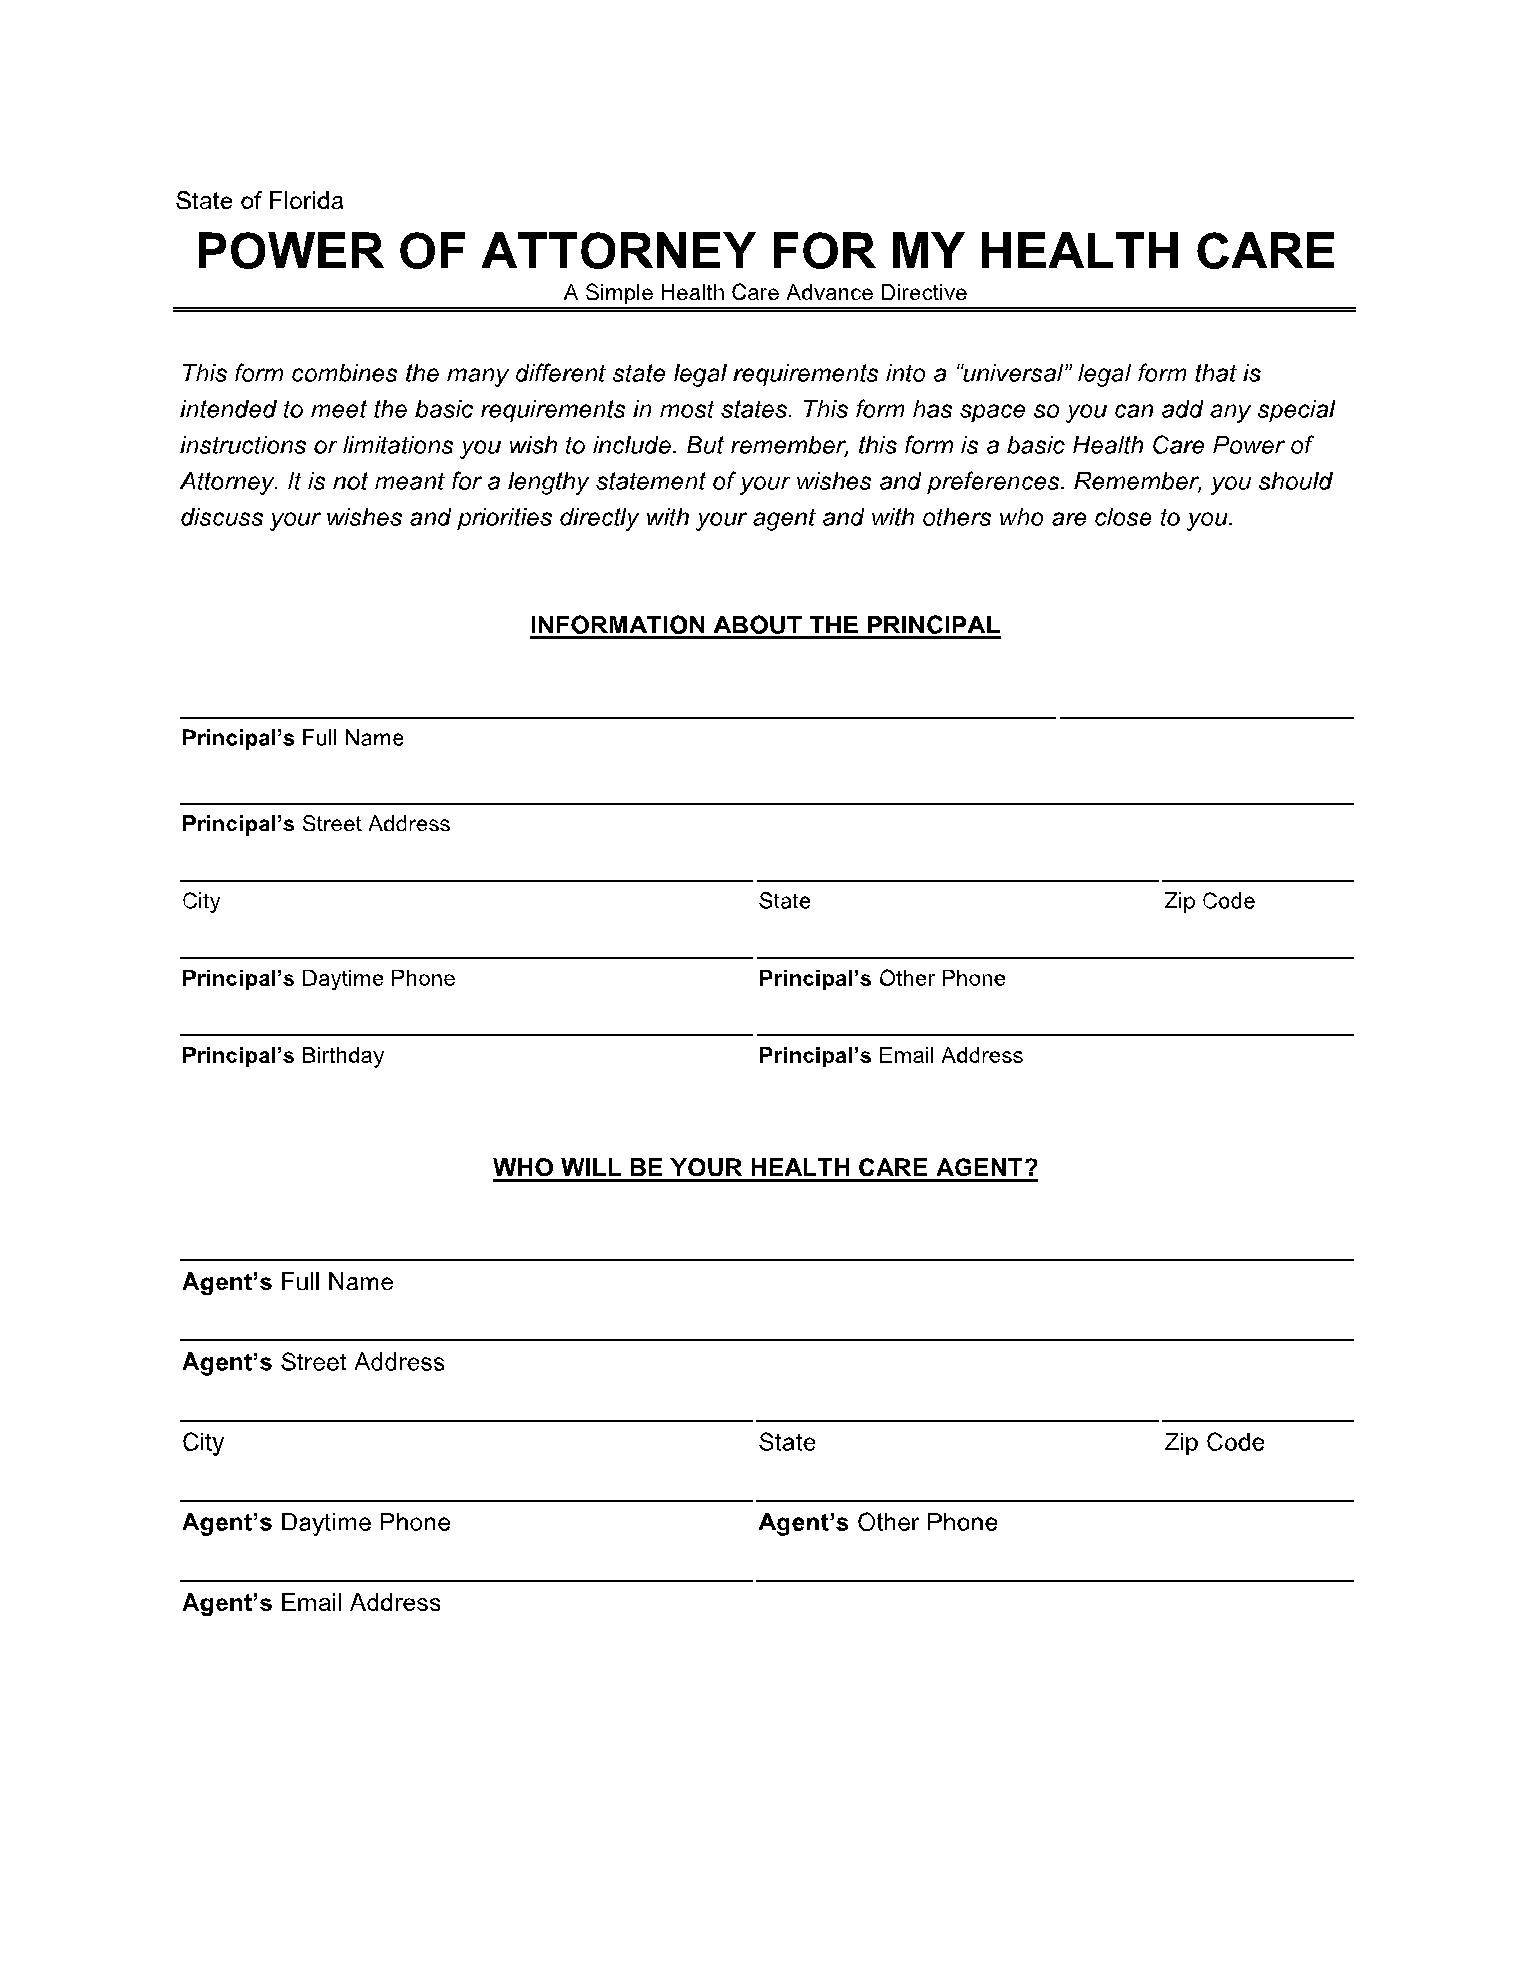 Medical Power of Attorney Florida